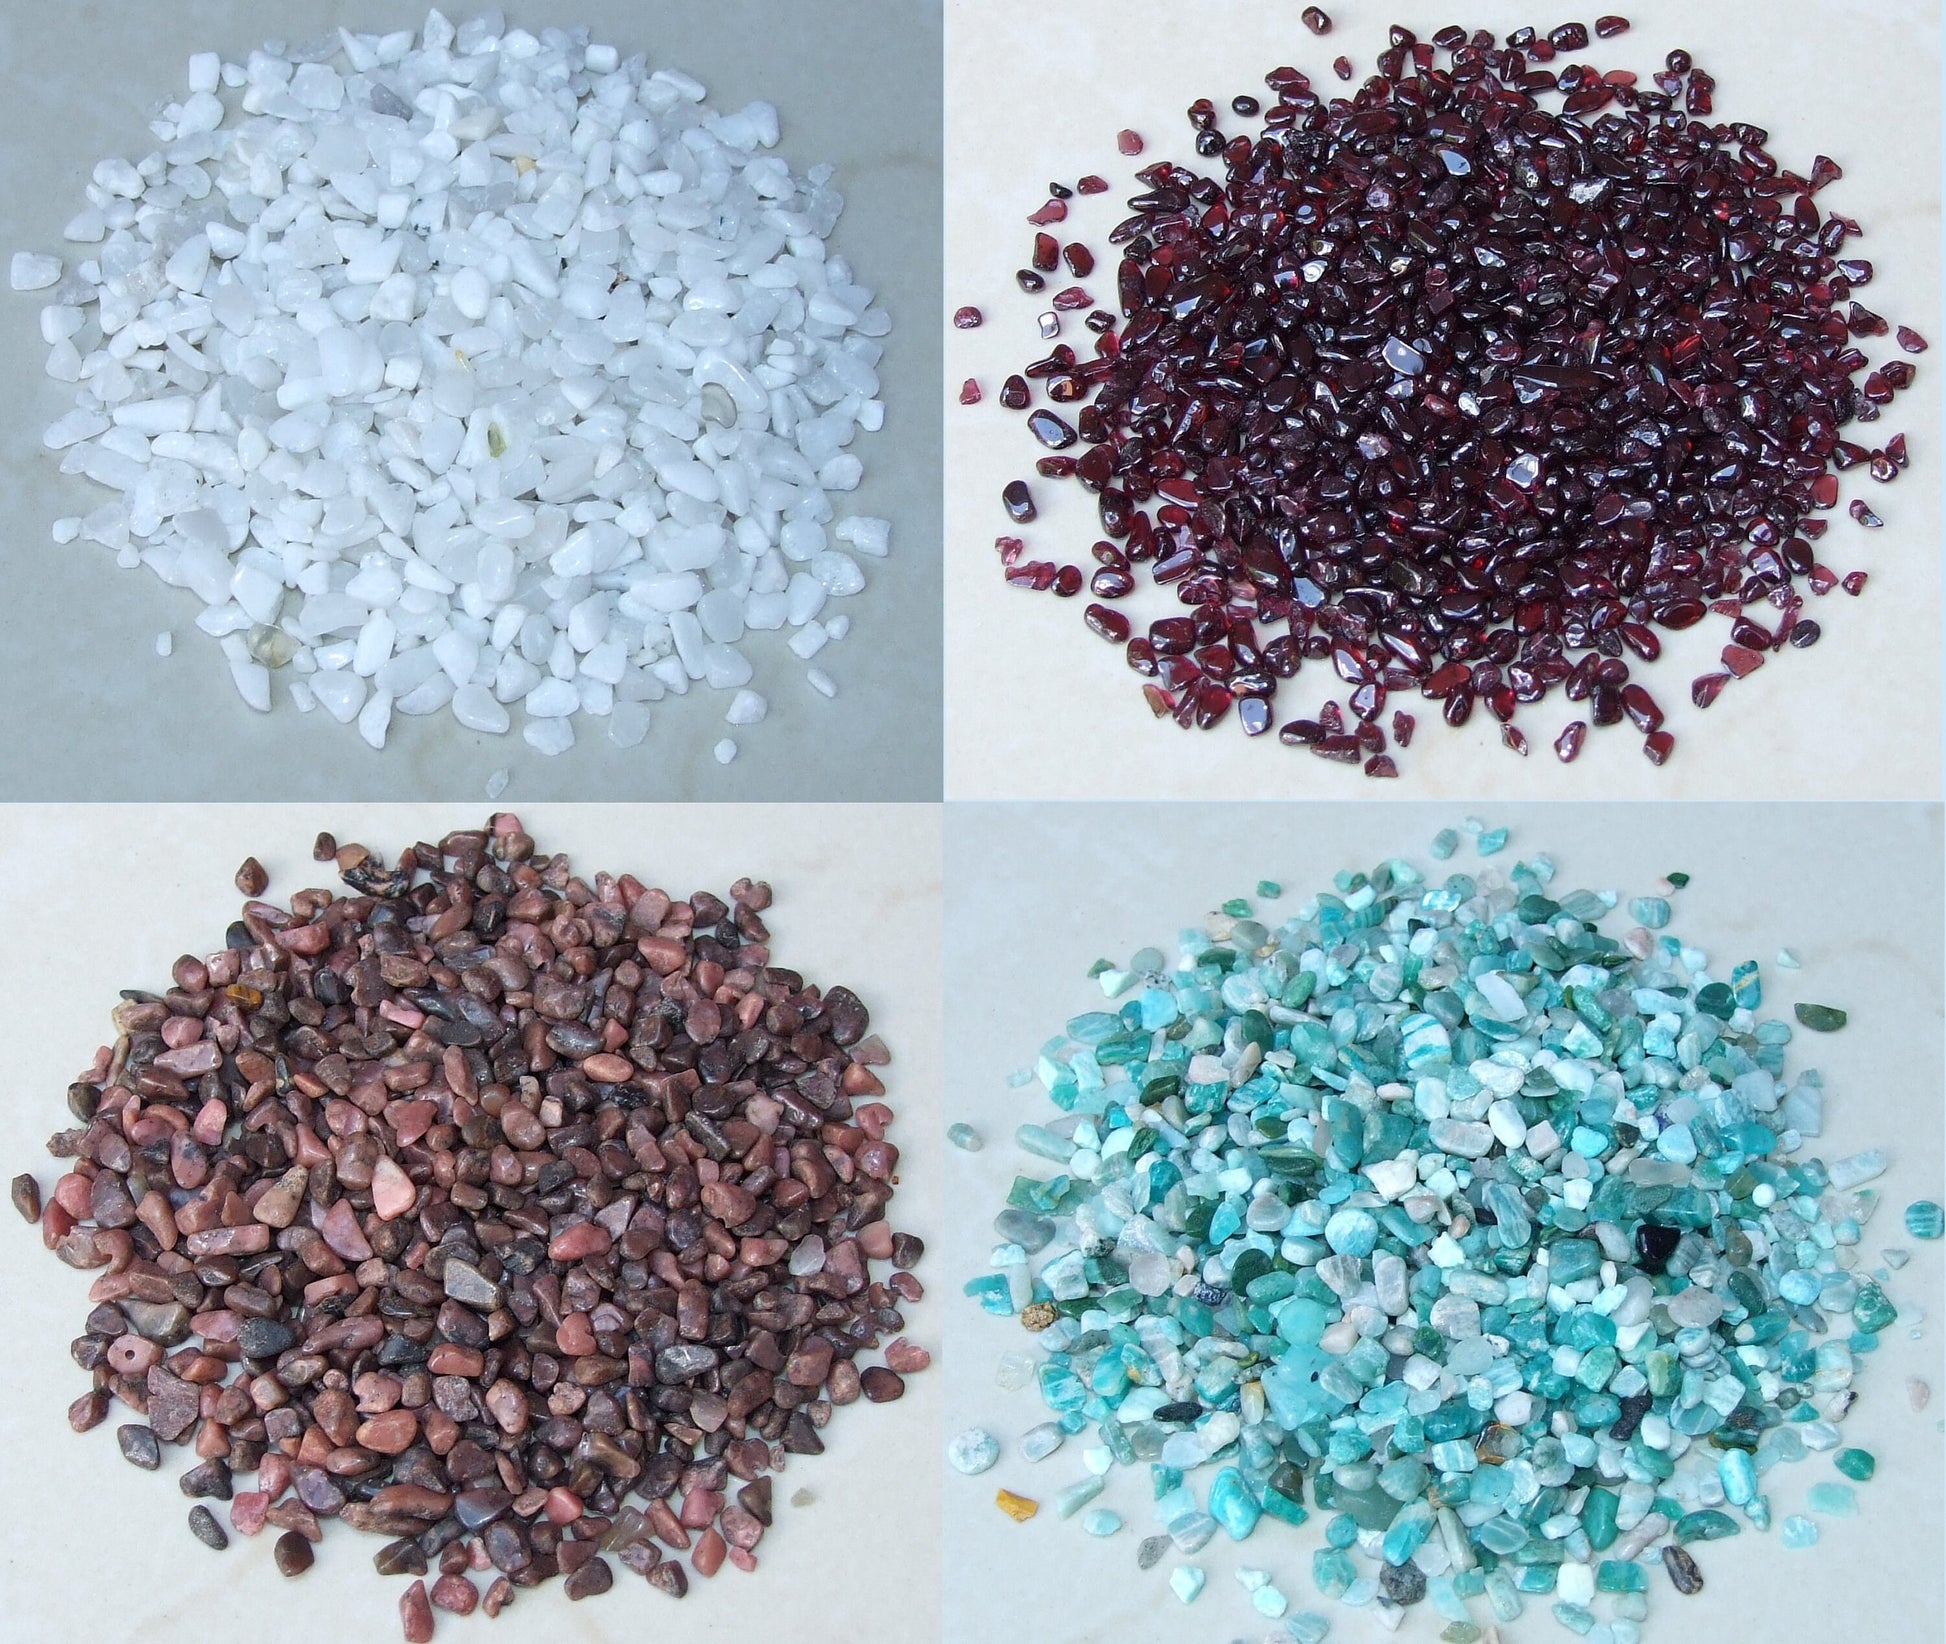 Tiny Polished Gemstone Chips, Small Natural Quartz Crystal Chips, Undrilled Gemstone Beads, Loose Bulk Jewelry Stones, 1.5 oz, 2mm to 7mm